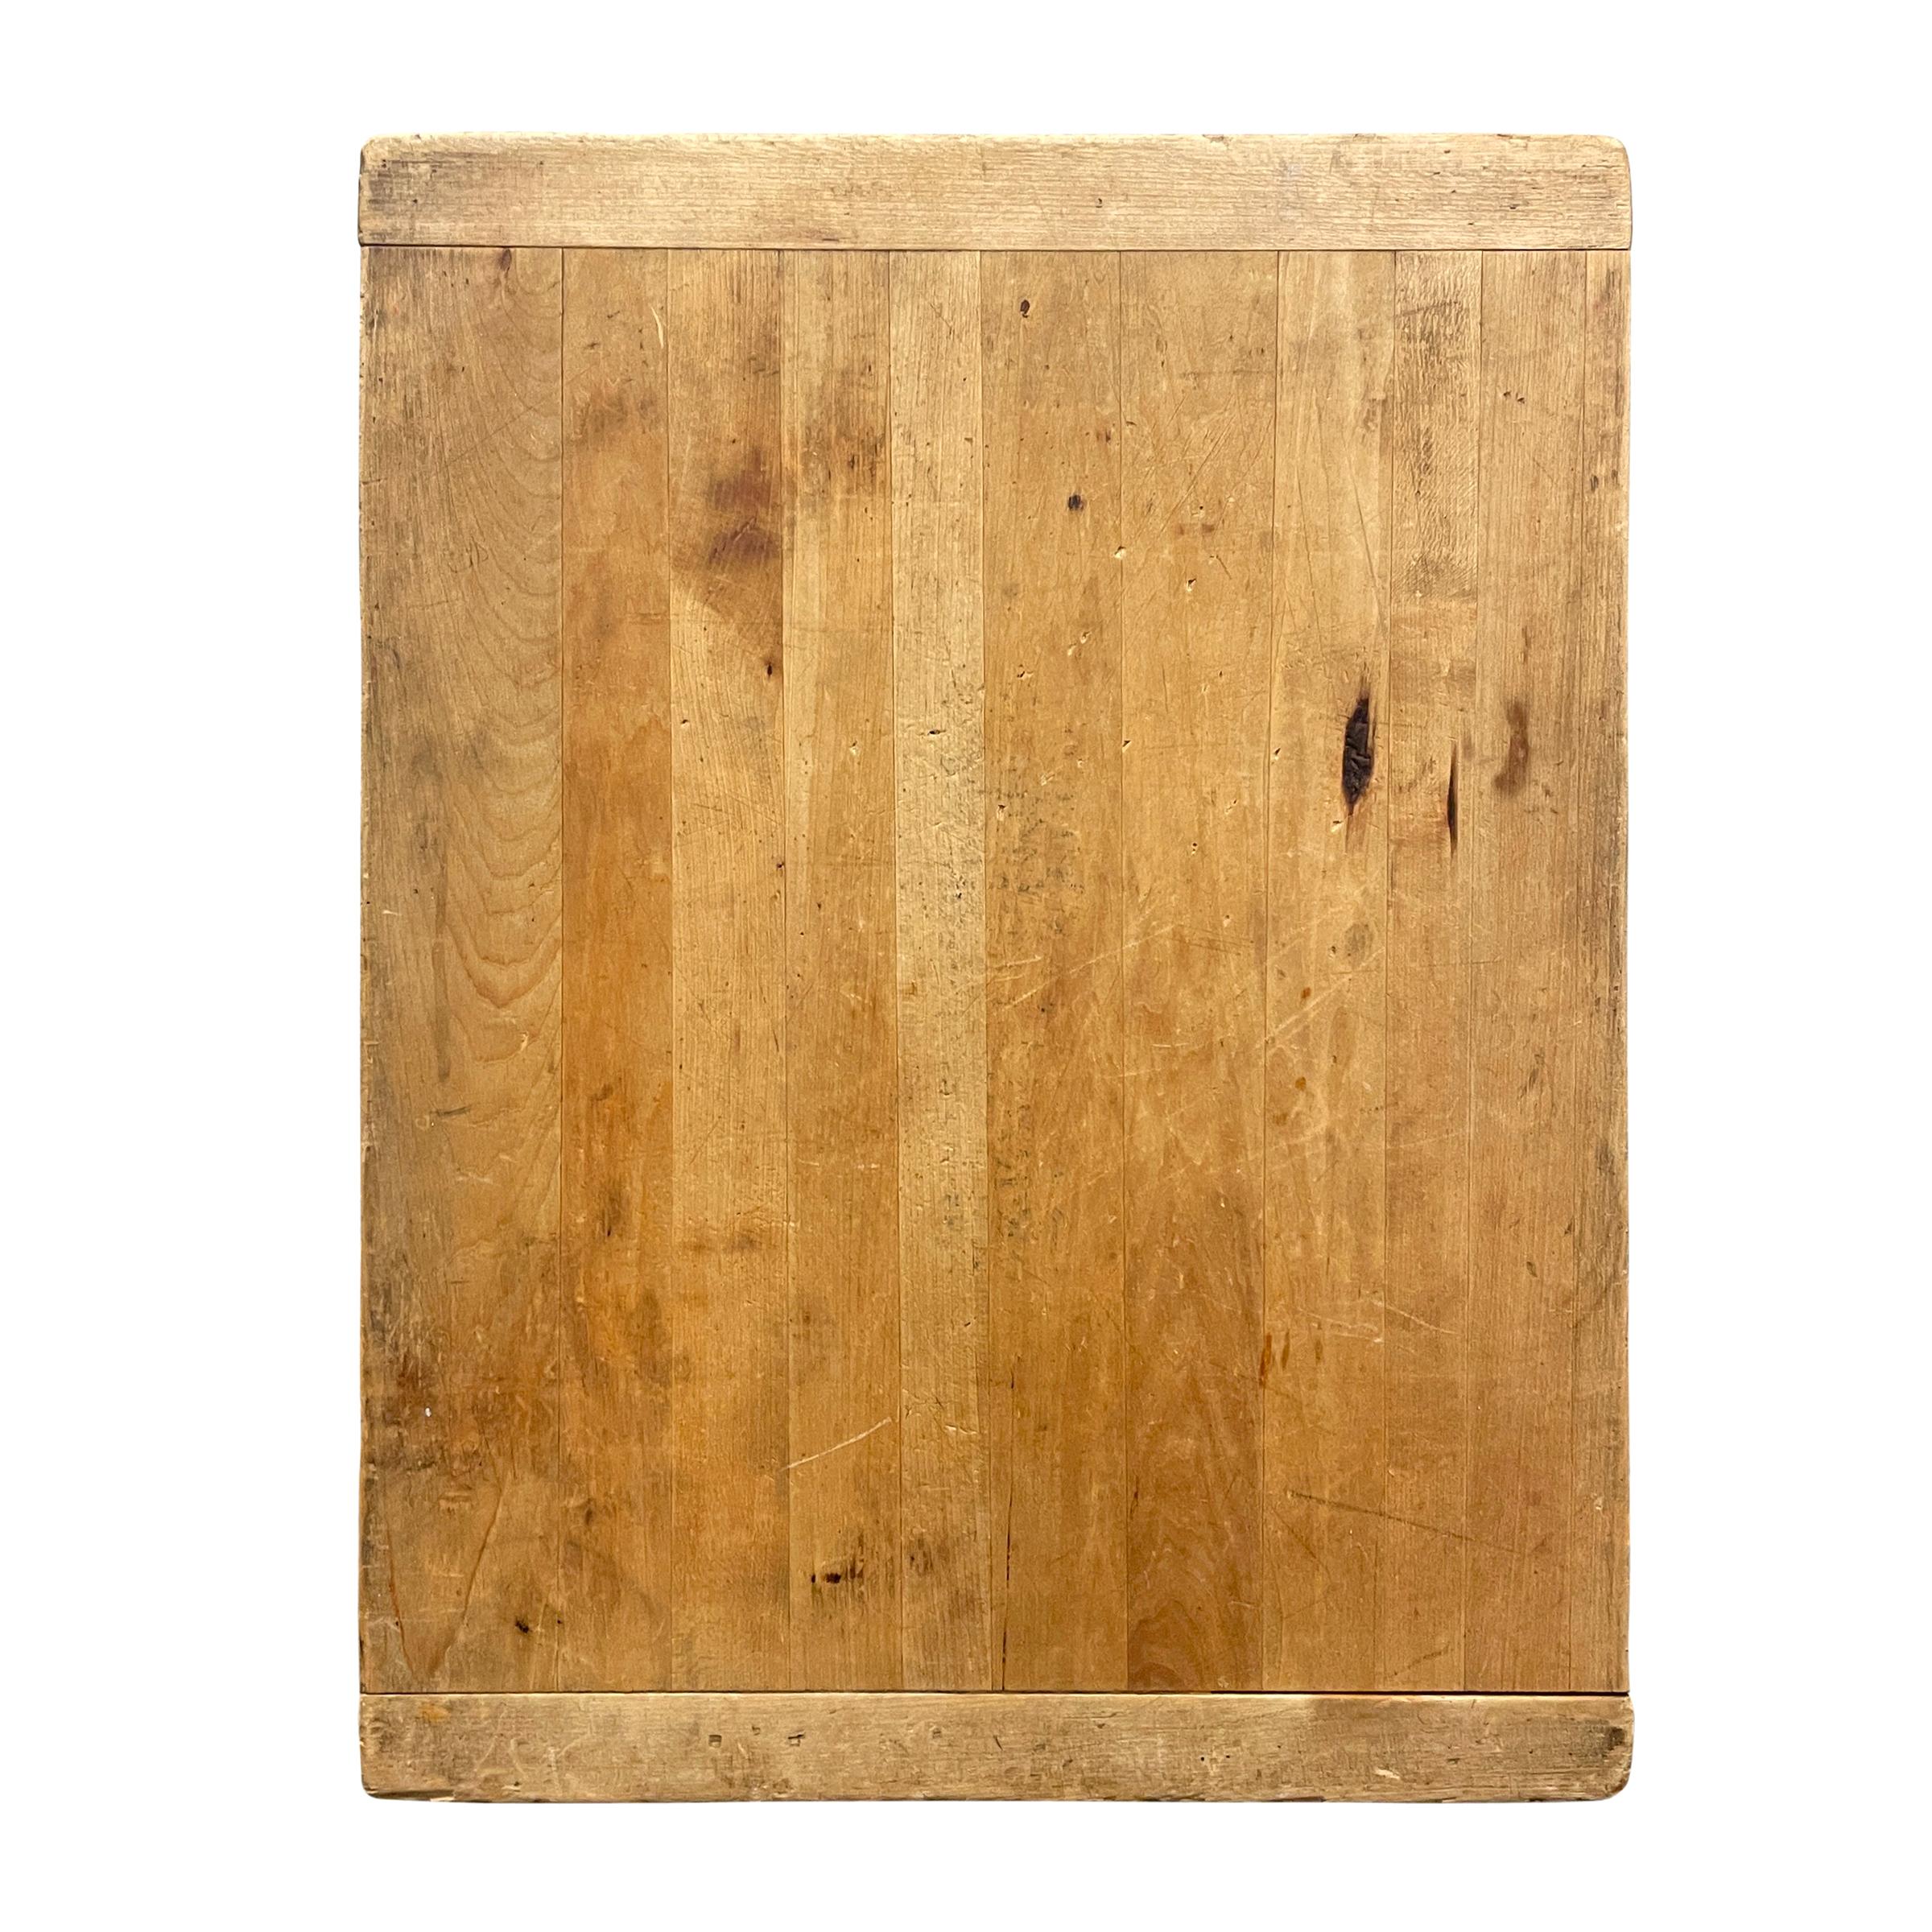 Country Early 20th Century American Maple Breadboard For Sale